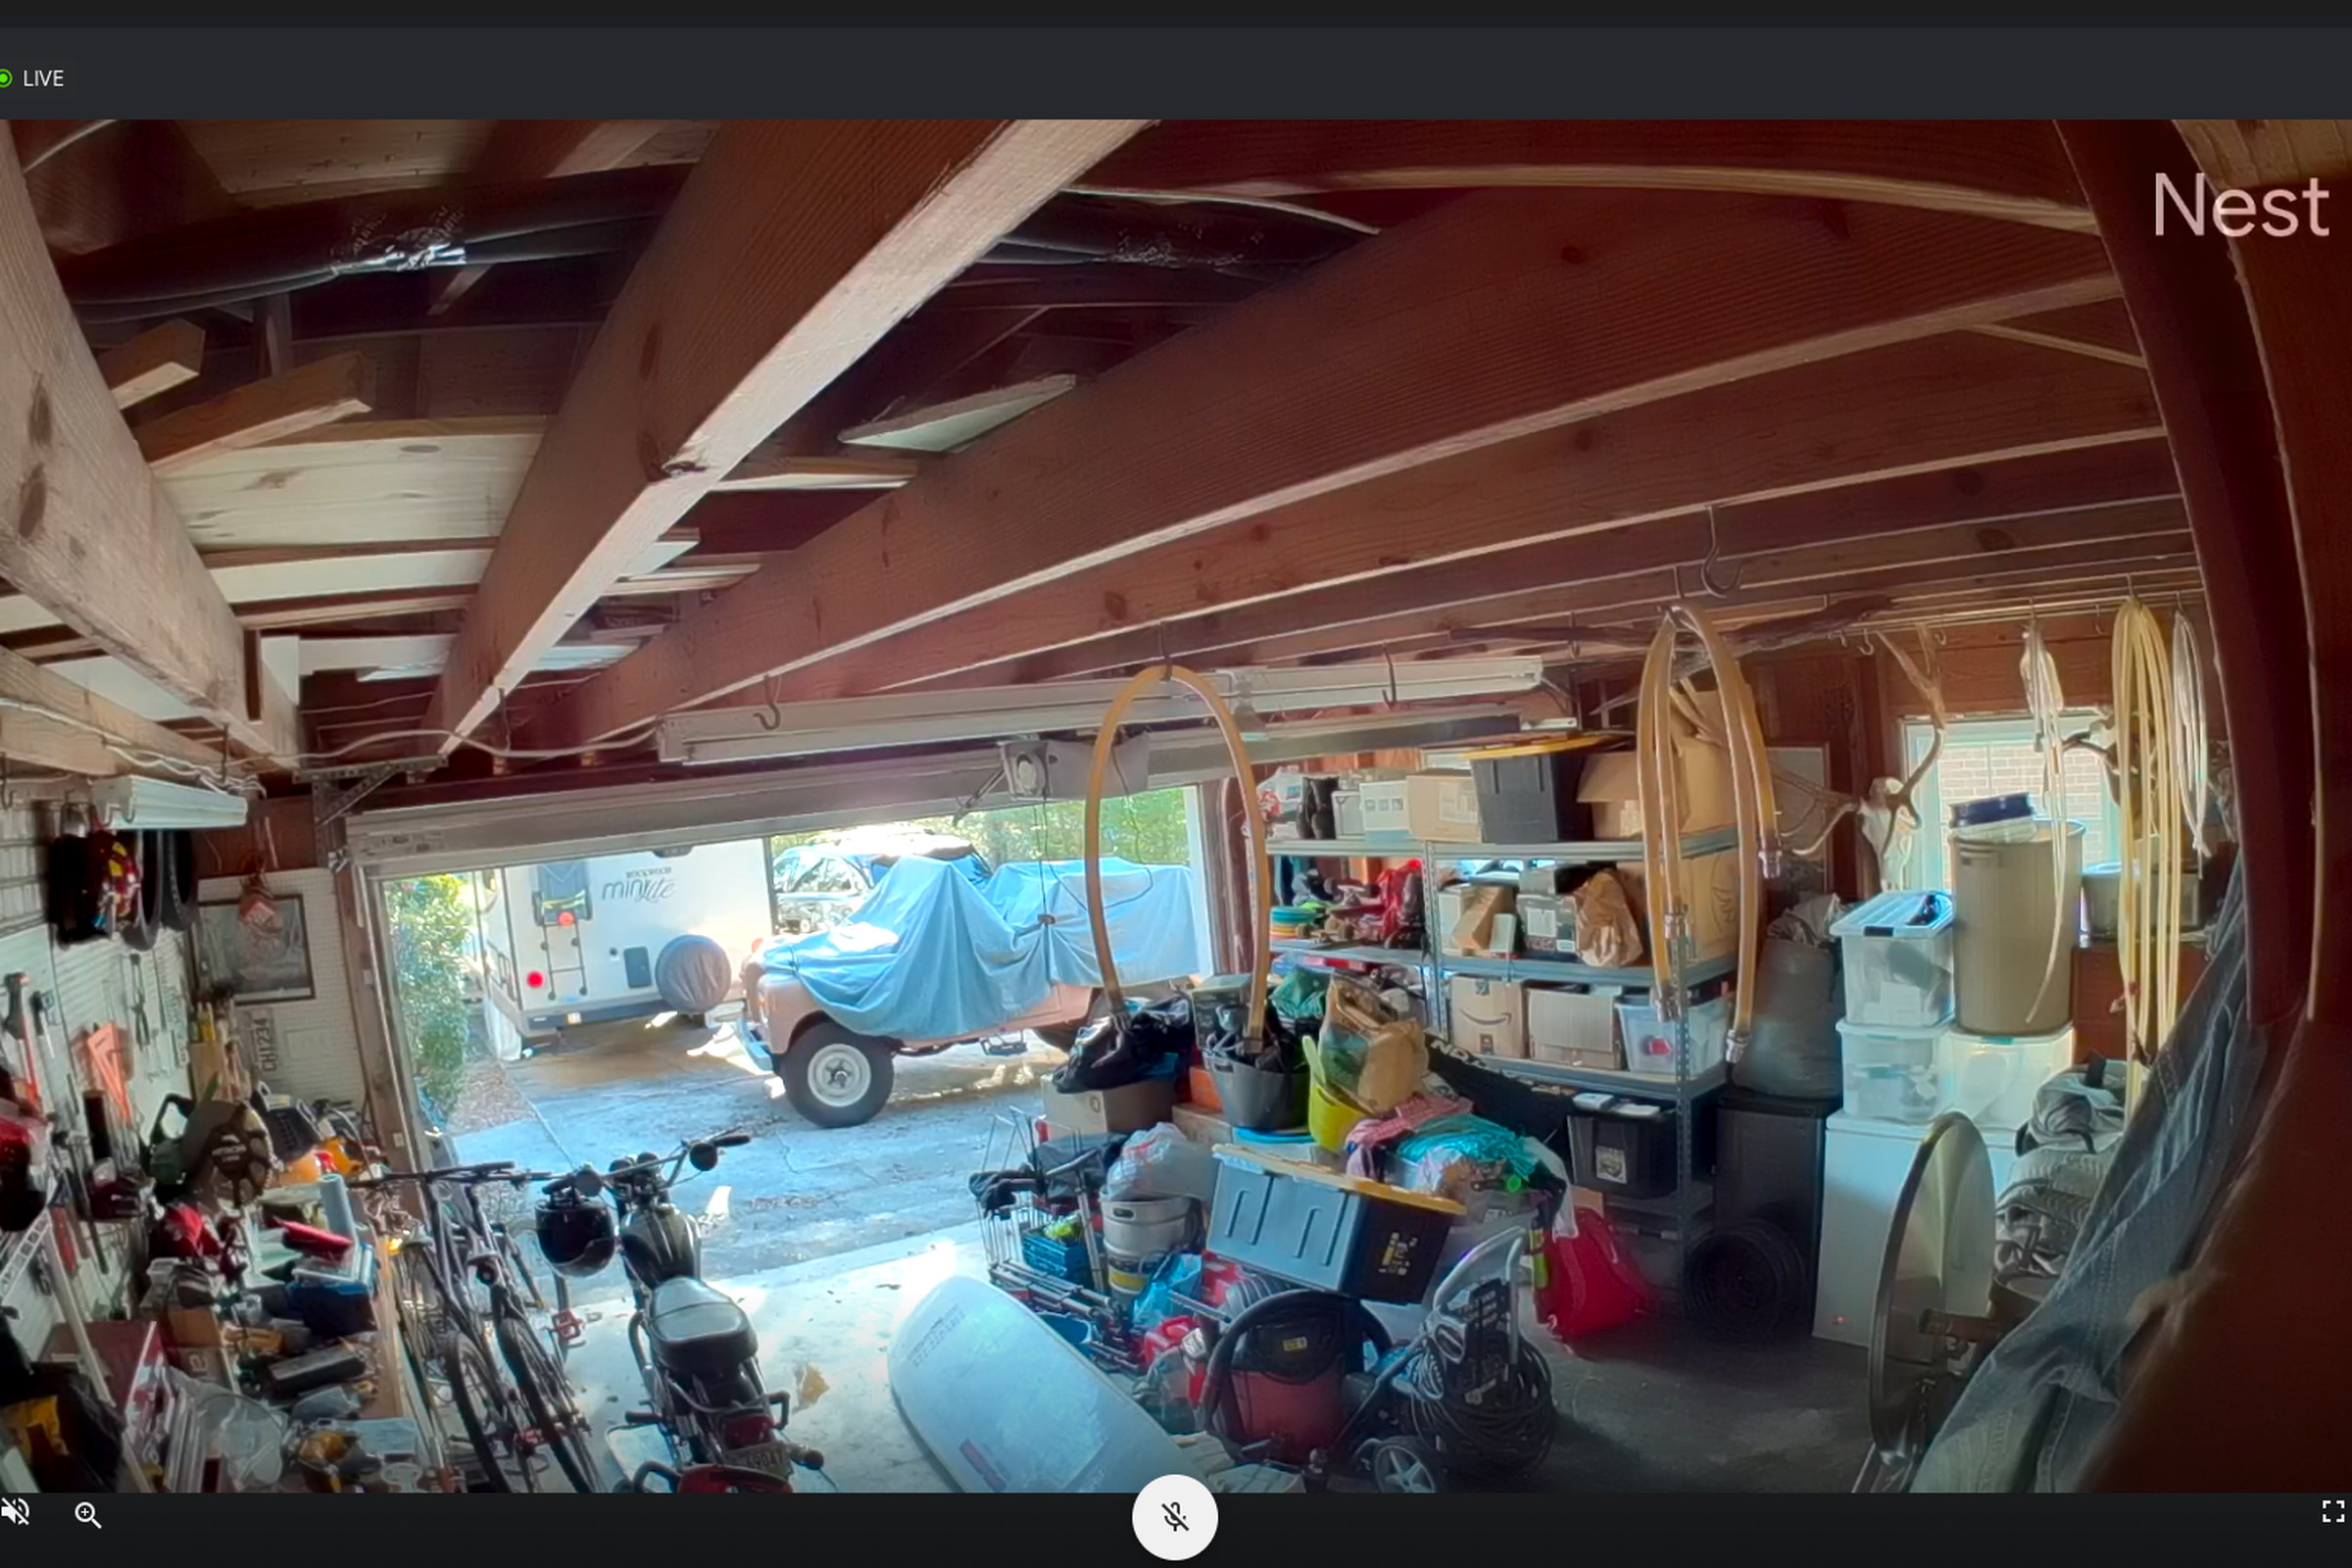 A Google Nest Cam set up in a garage will soon be able to send an alert if the door is left open.